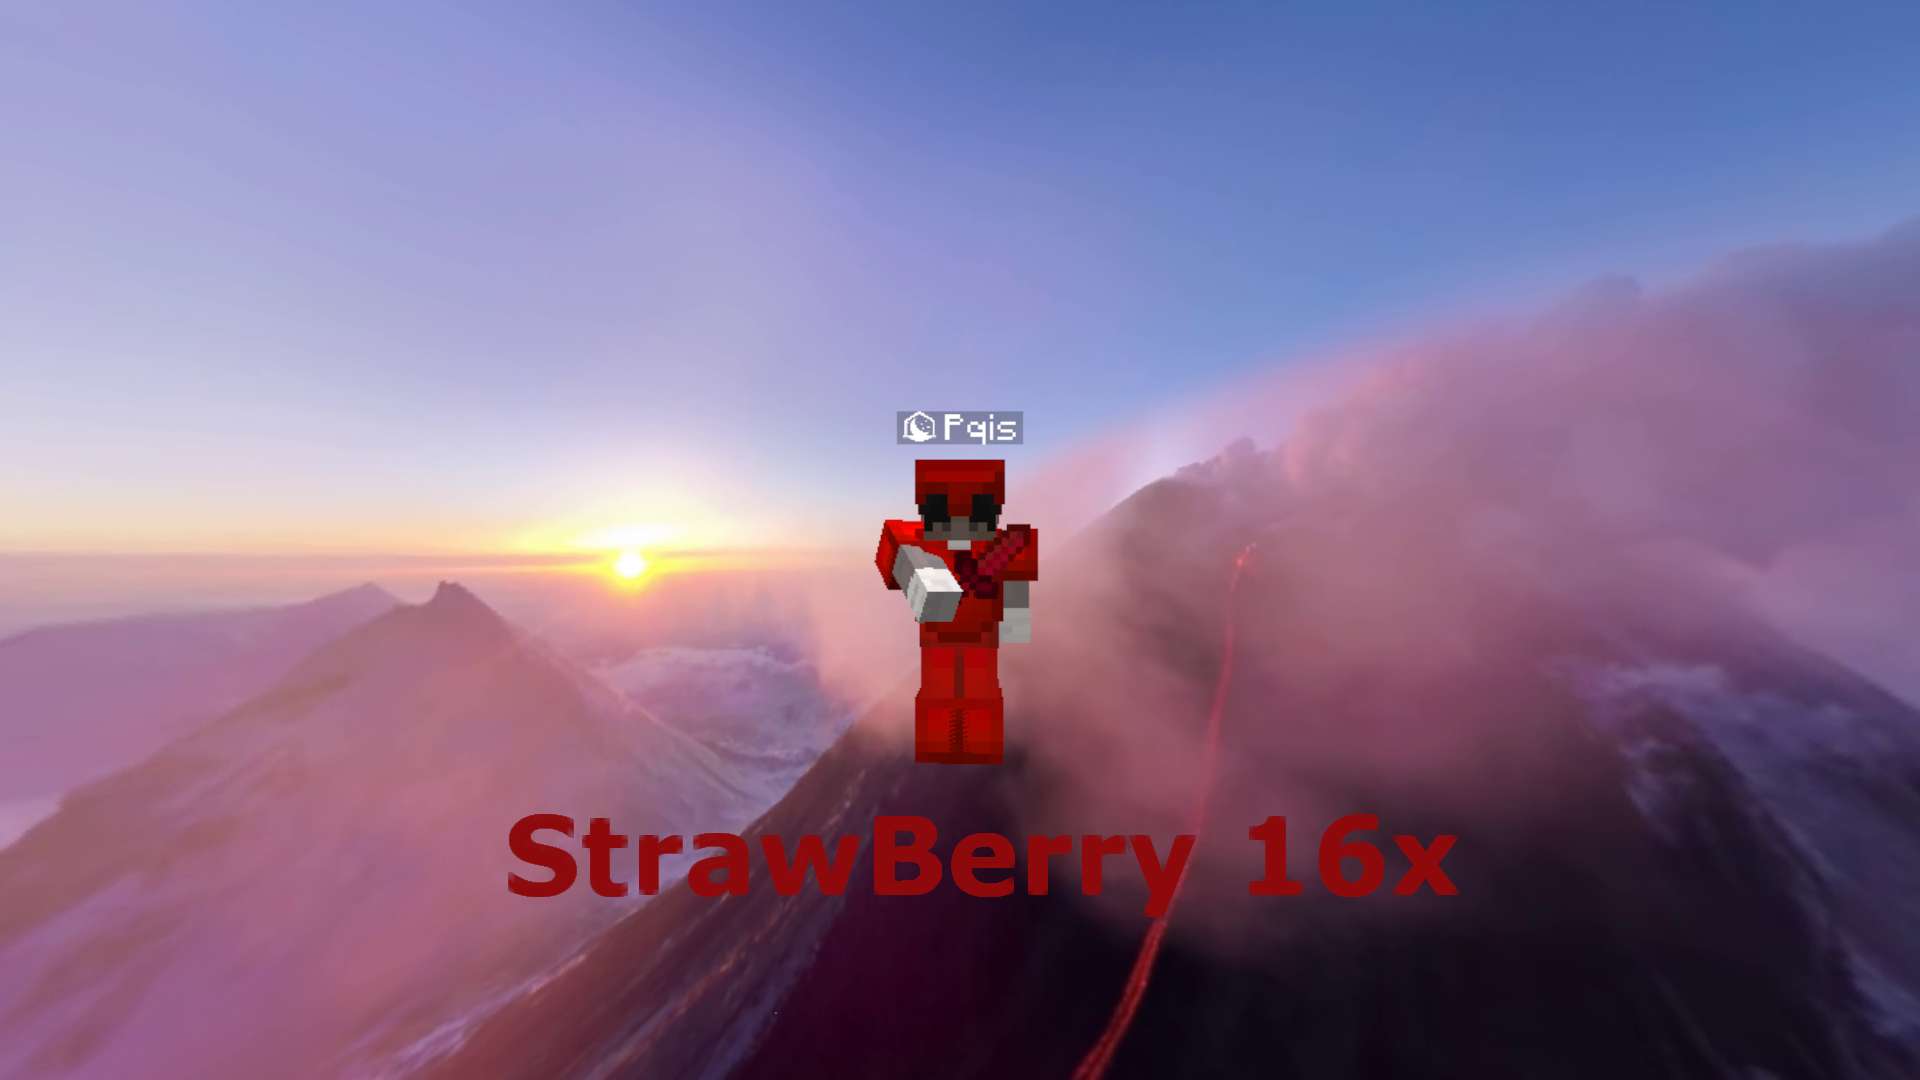 StrawBerry 16x By Pqis 16 by Pqis on PvPRP